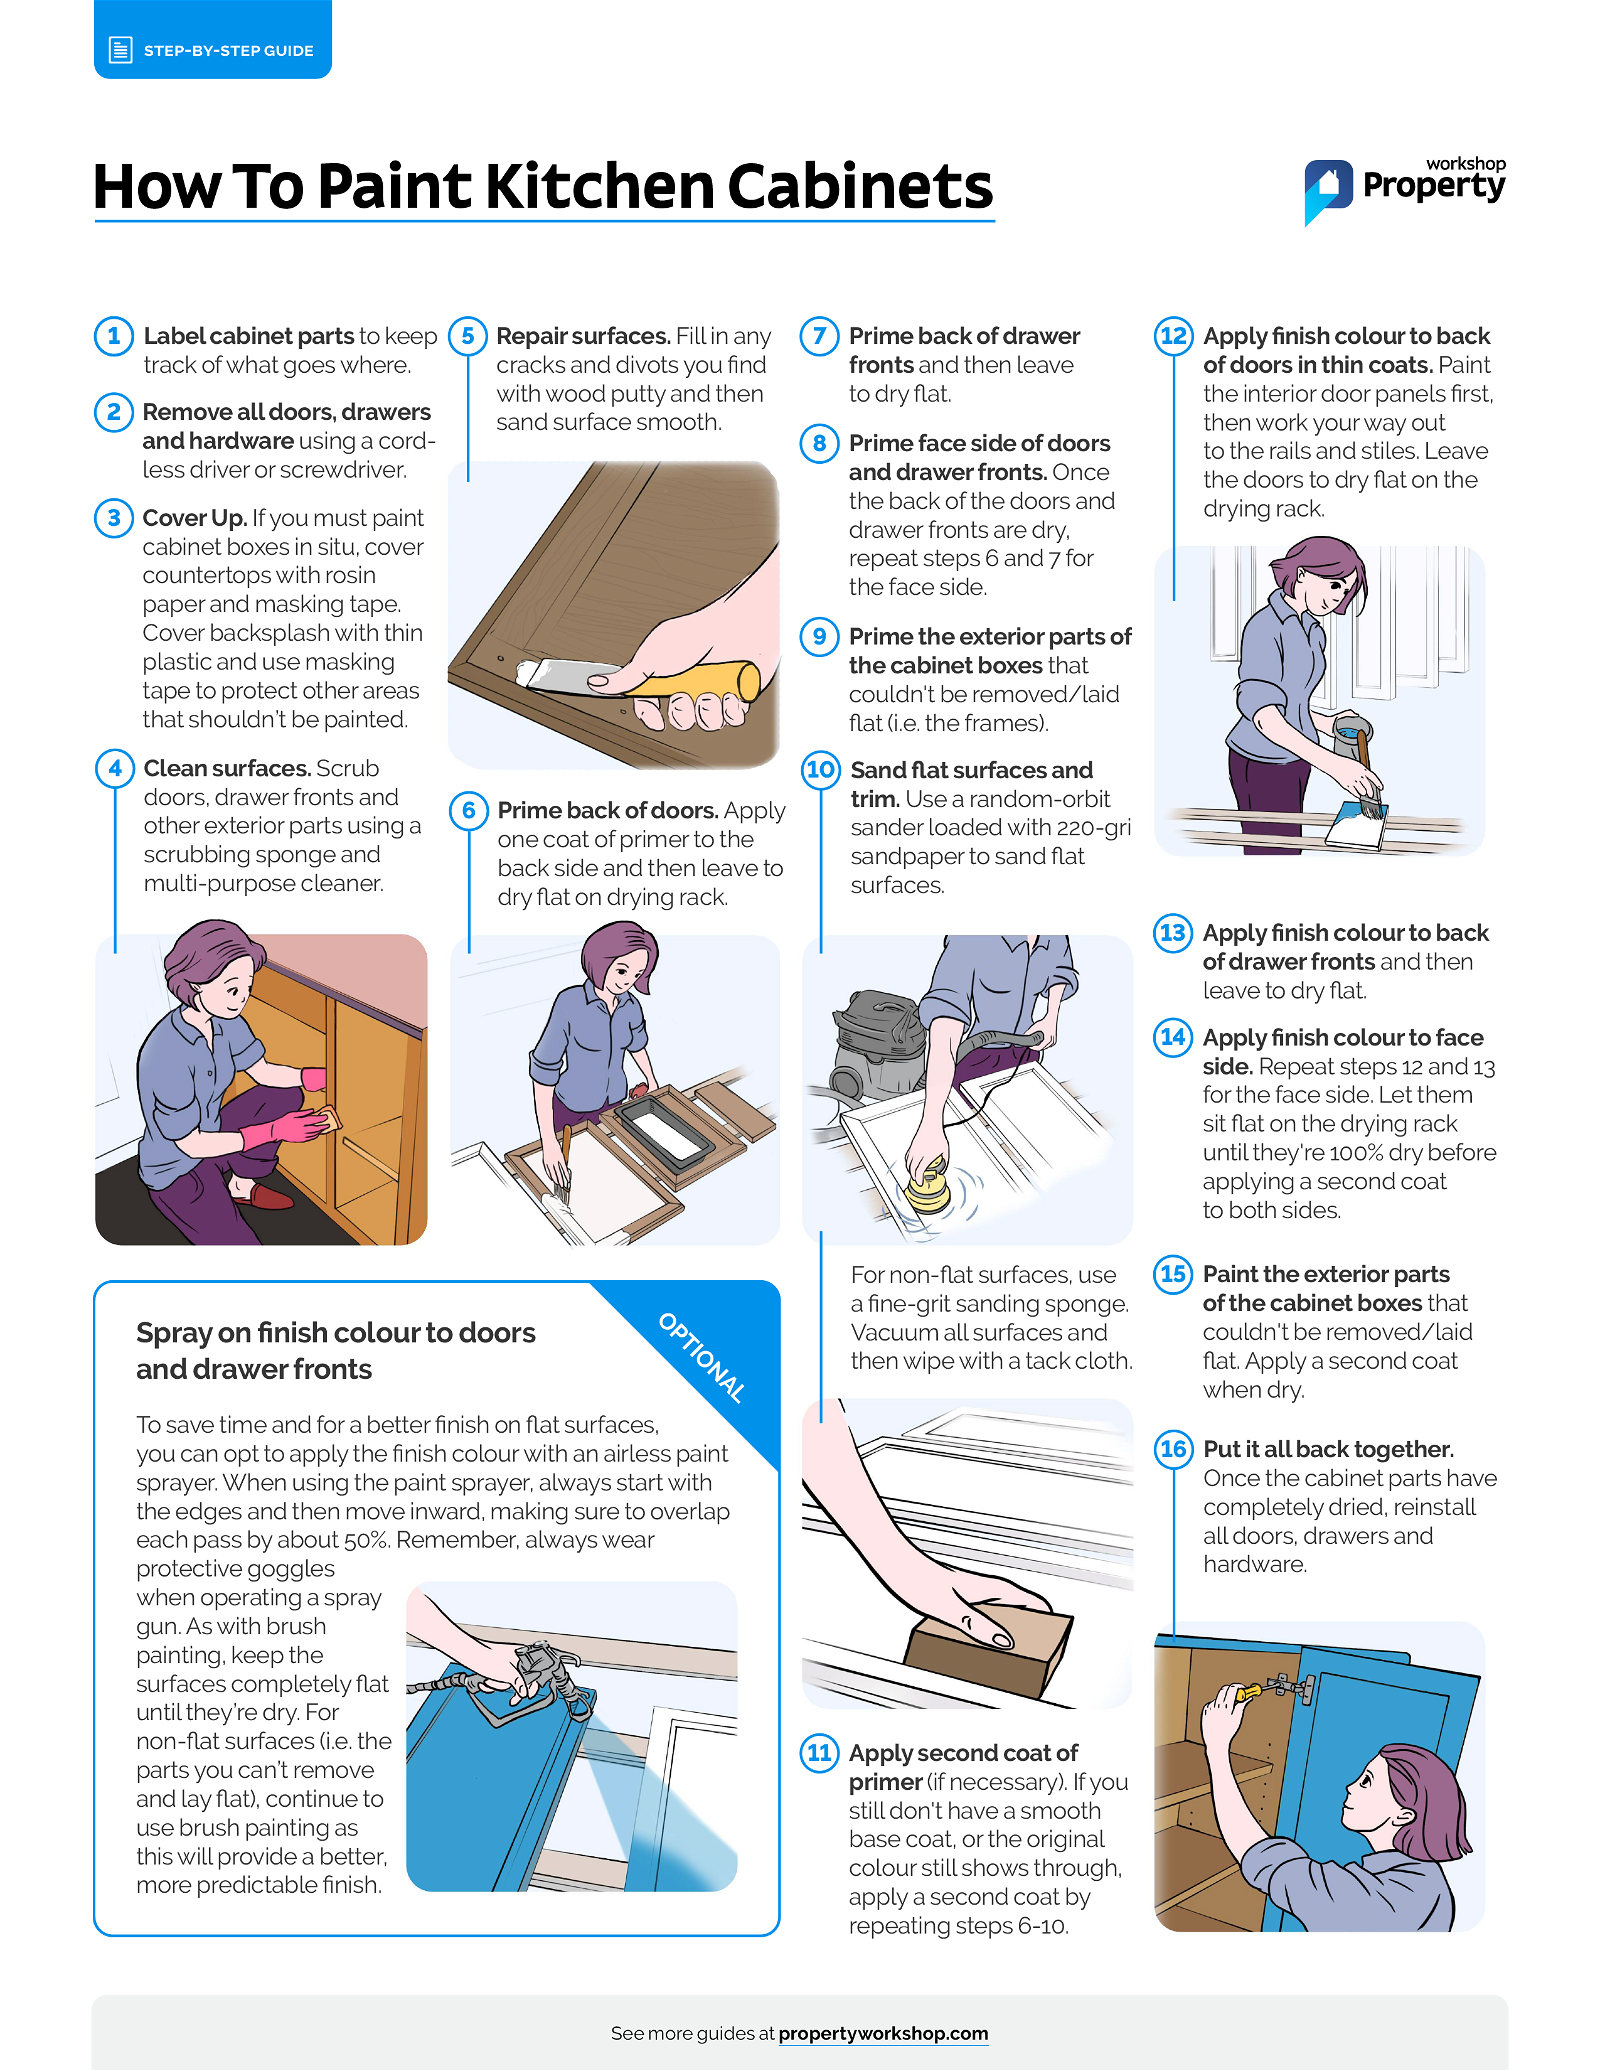 how to paint kitchen cabinets infographic